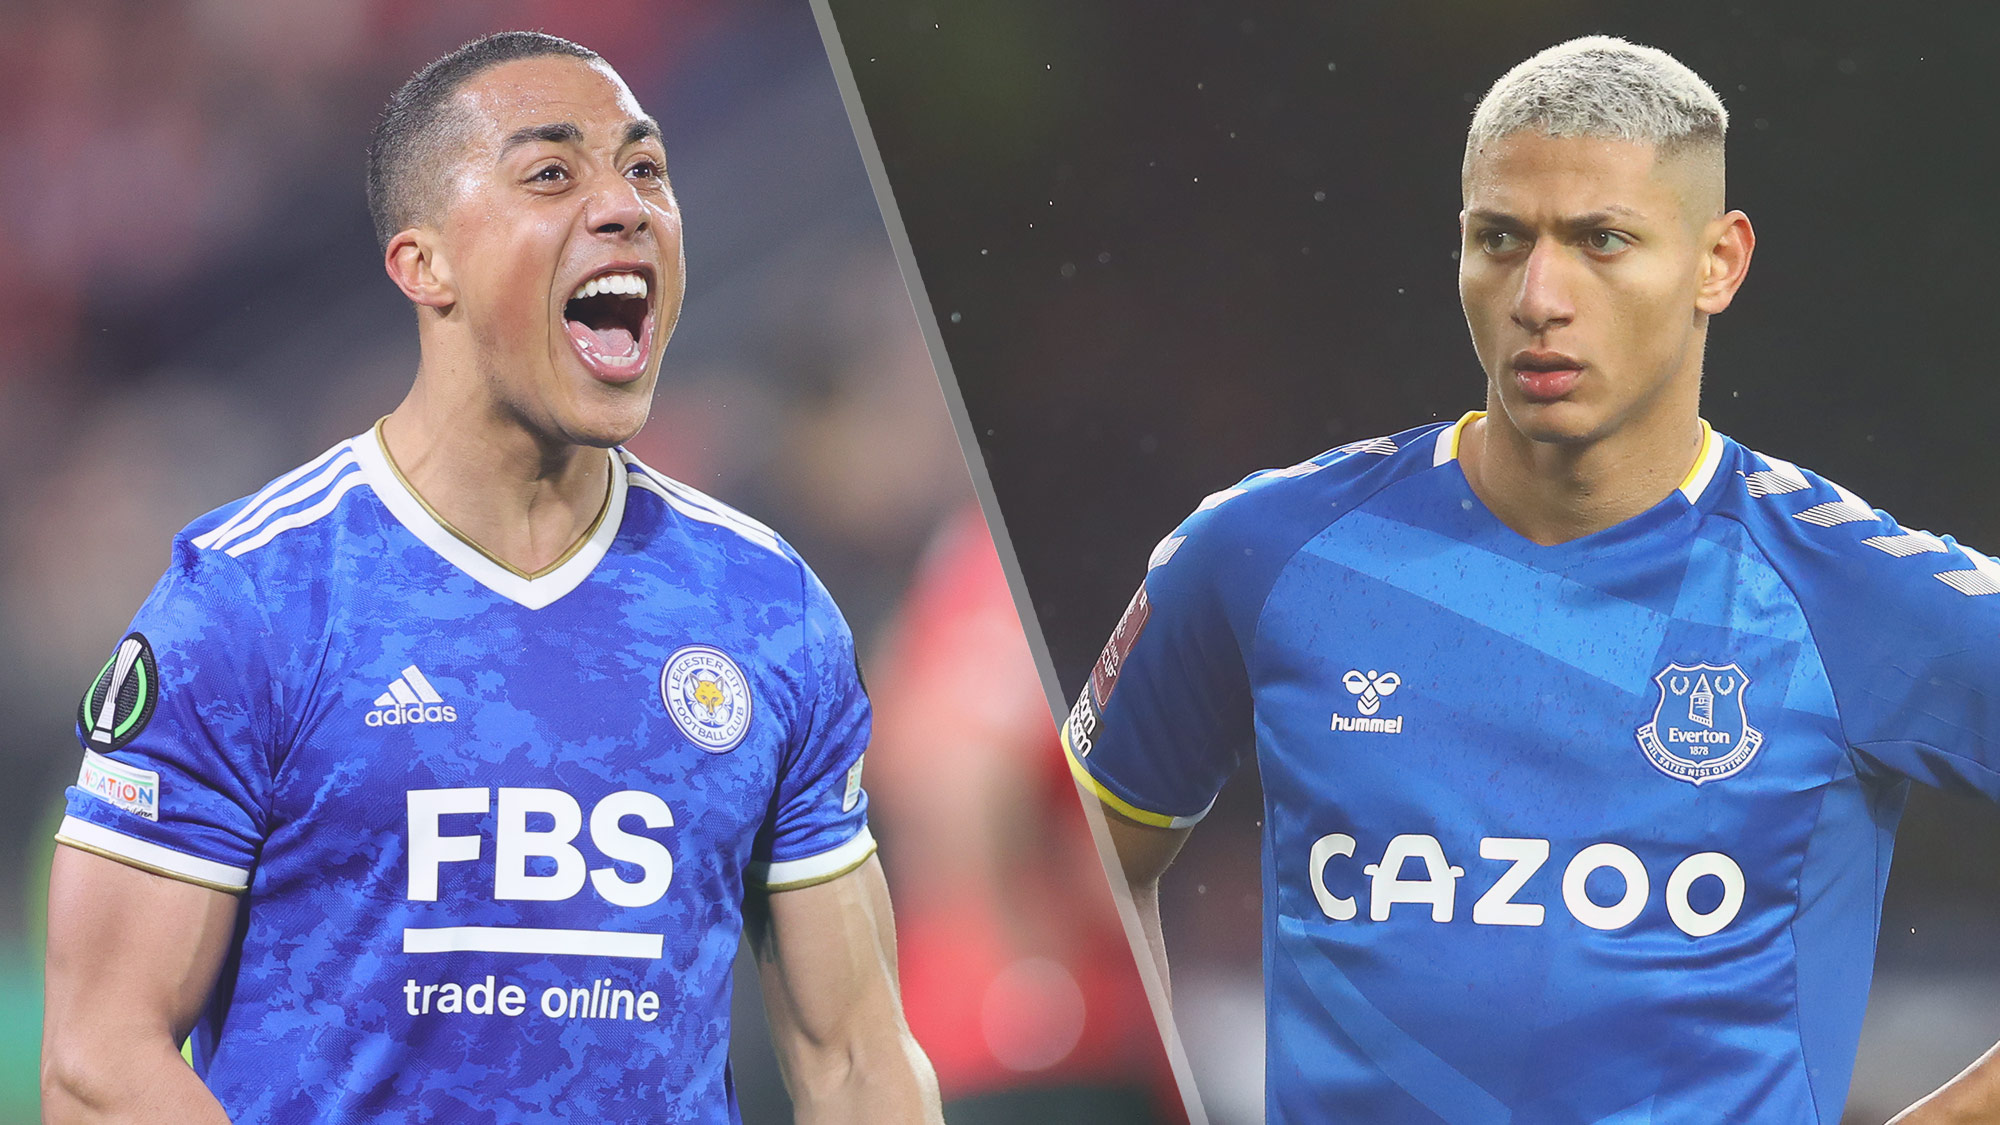 Youri Tielemans from Leicester City and Richarlison from Everton are both available to appear in the Leicester vs Everton live stream.